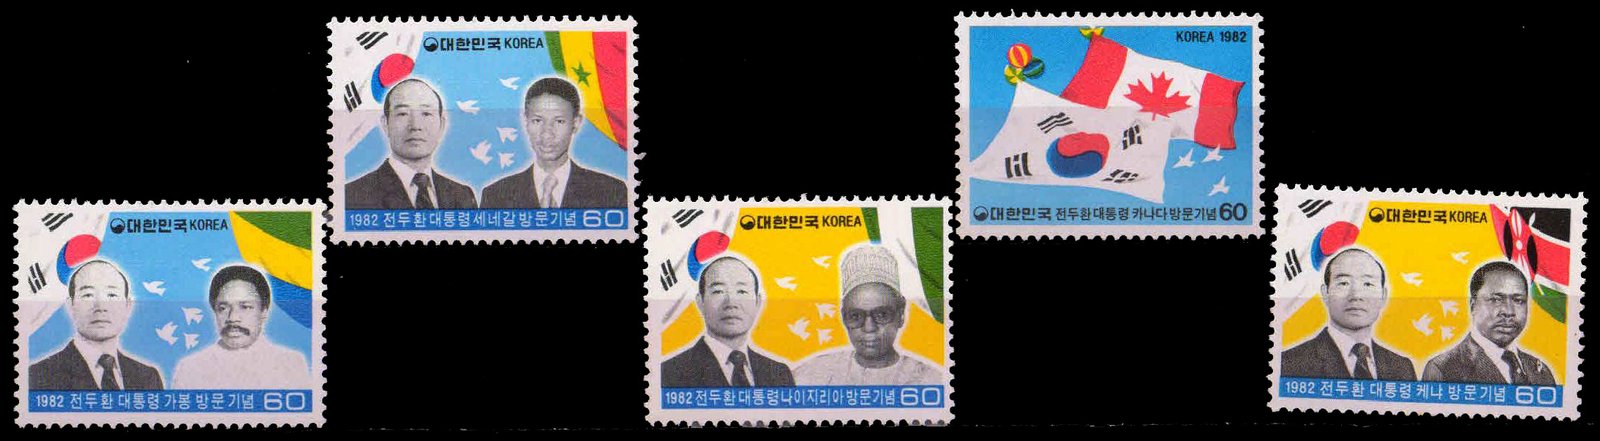 SOUTH KOREA 1982-Presidential Visits to Africa & Canada, Presidents, Flags, Set of 5, MNH< S.G. 1526-30